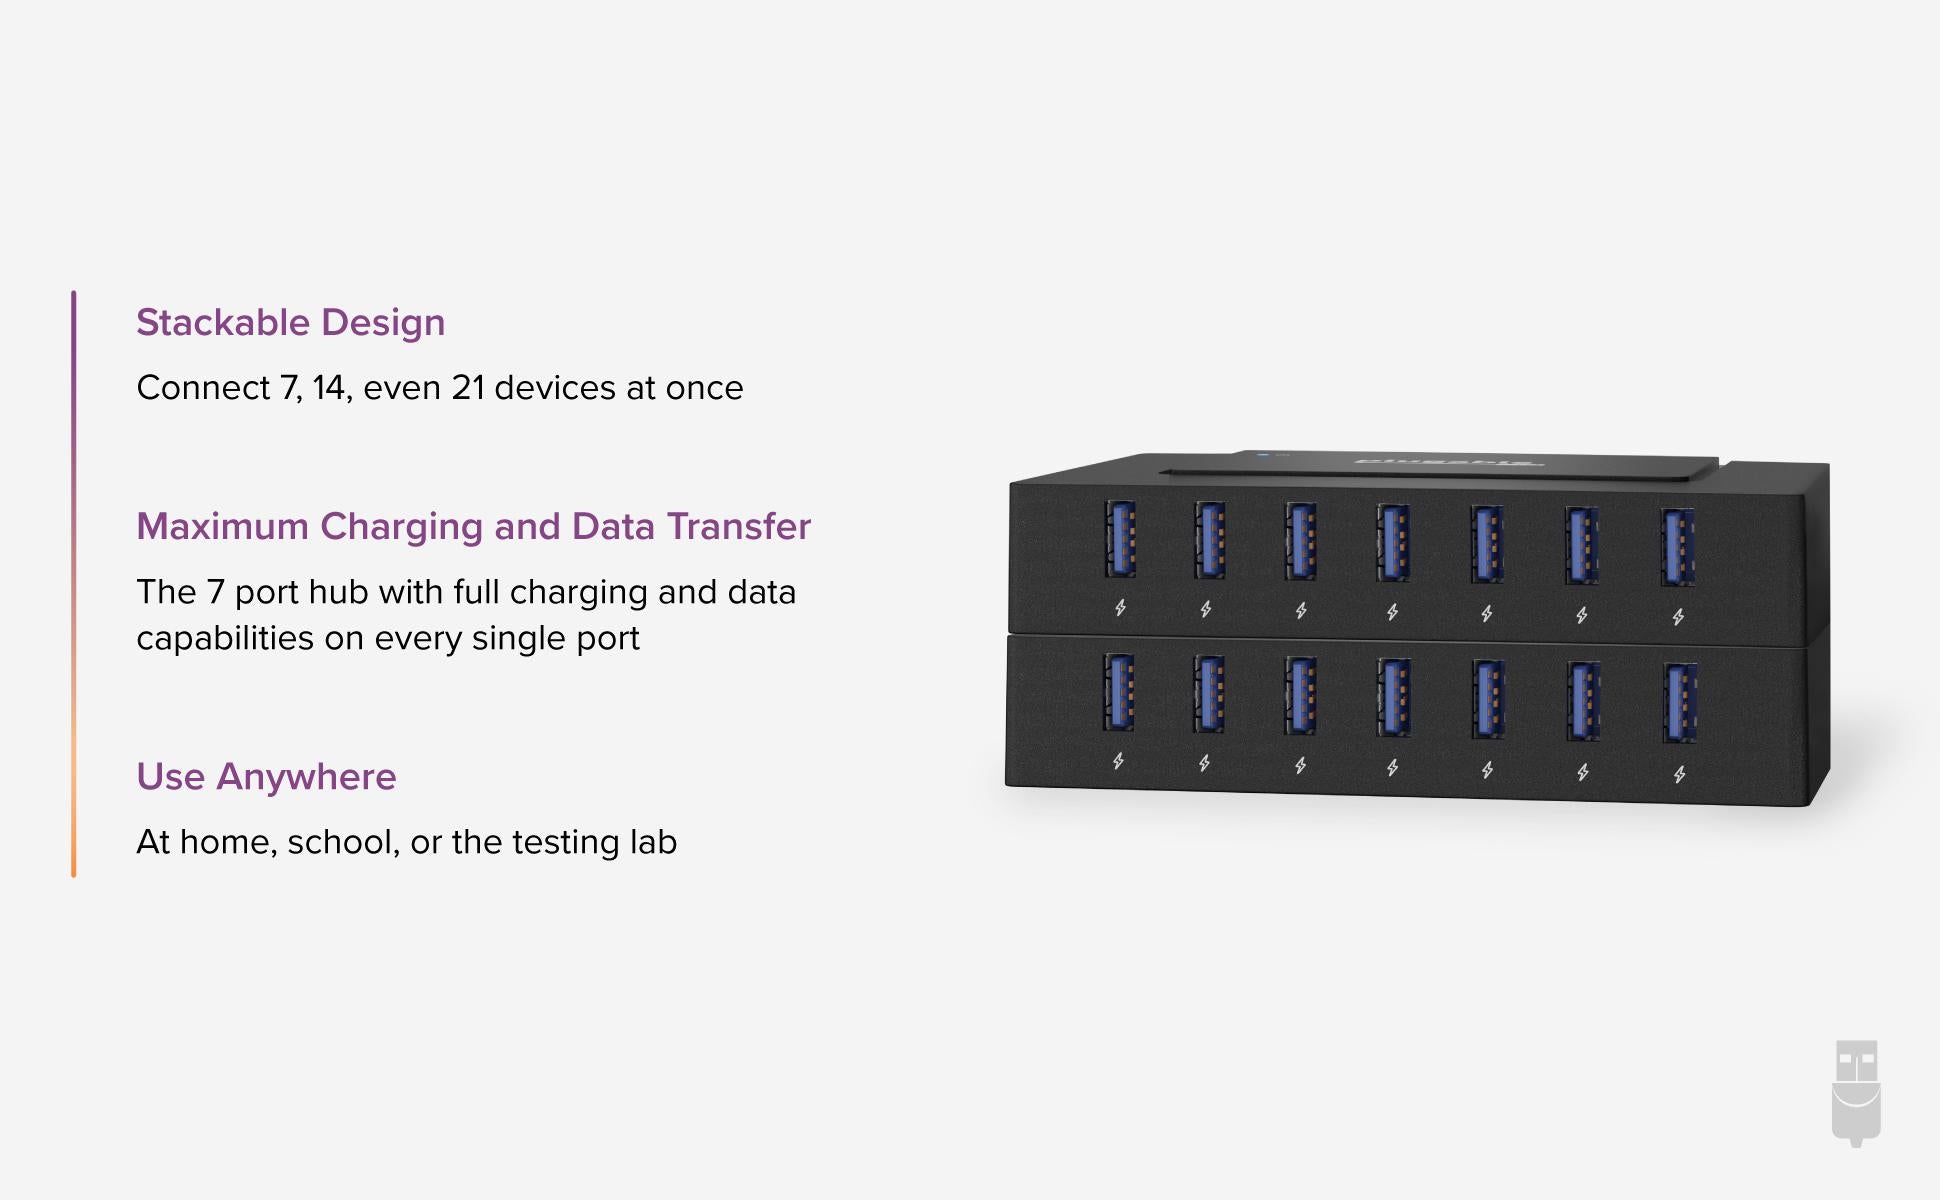 Stackable Design: Connect 7,14, even 21 devices at once. Maximum Charging and Data Transfer: The 7 port hub with full charging and data capabilities on every single port. Use Anywhere:  At home, school, or the testing lab